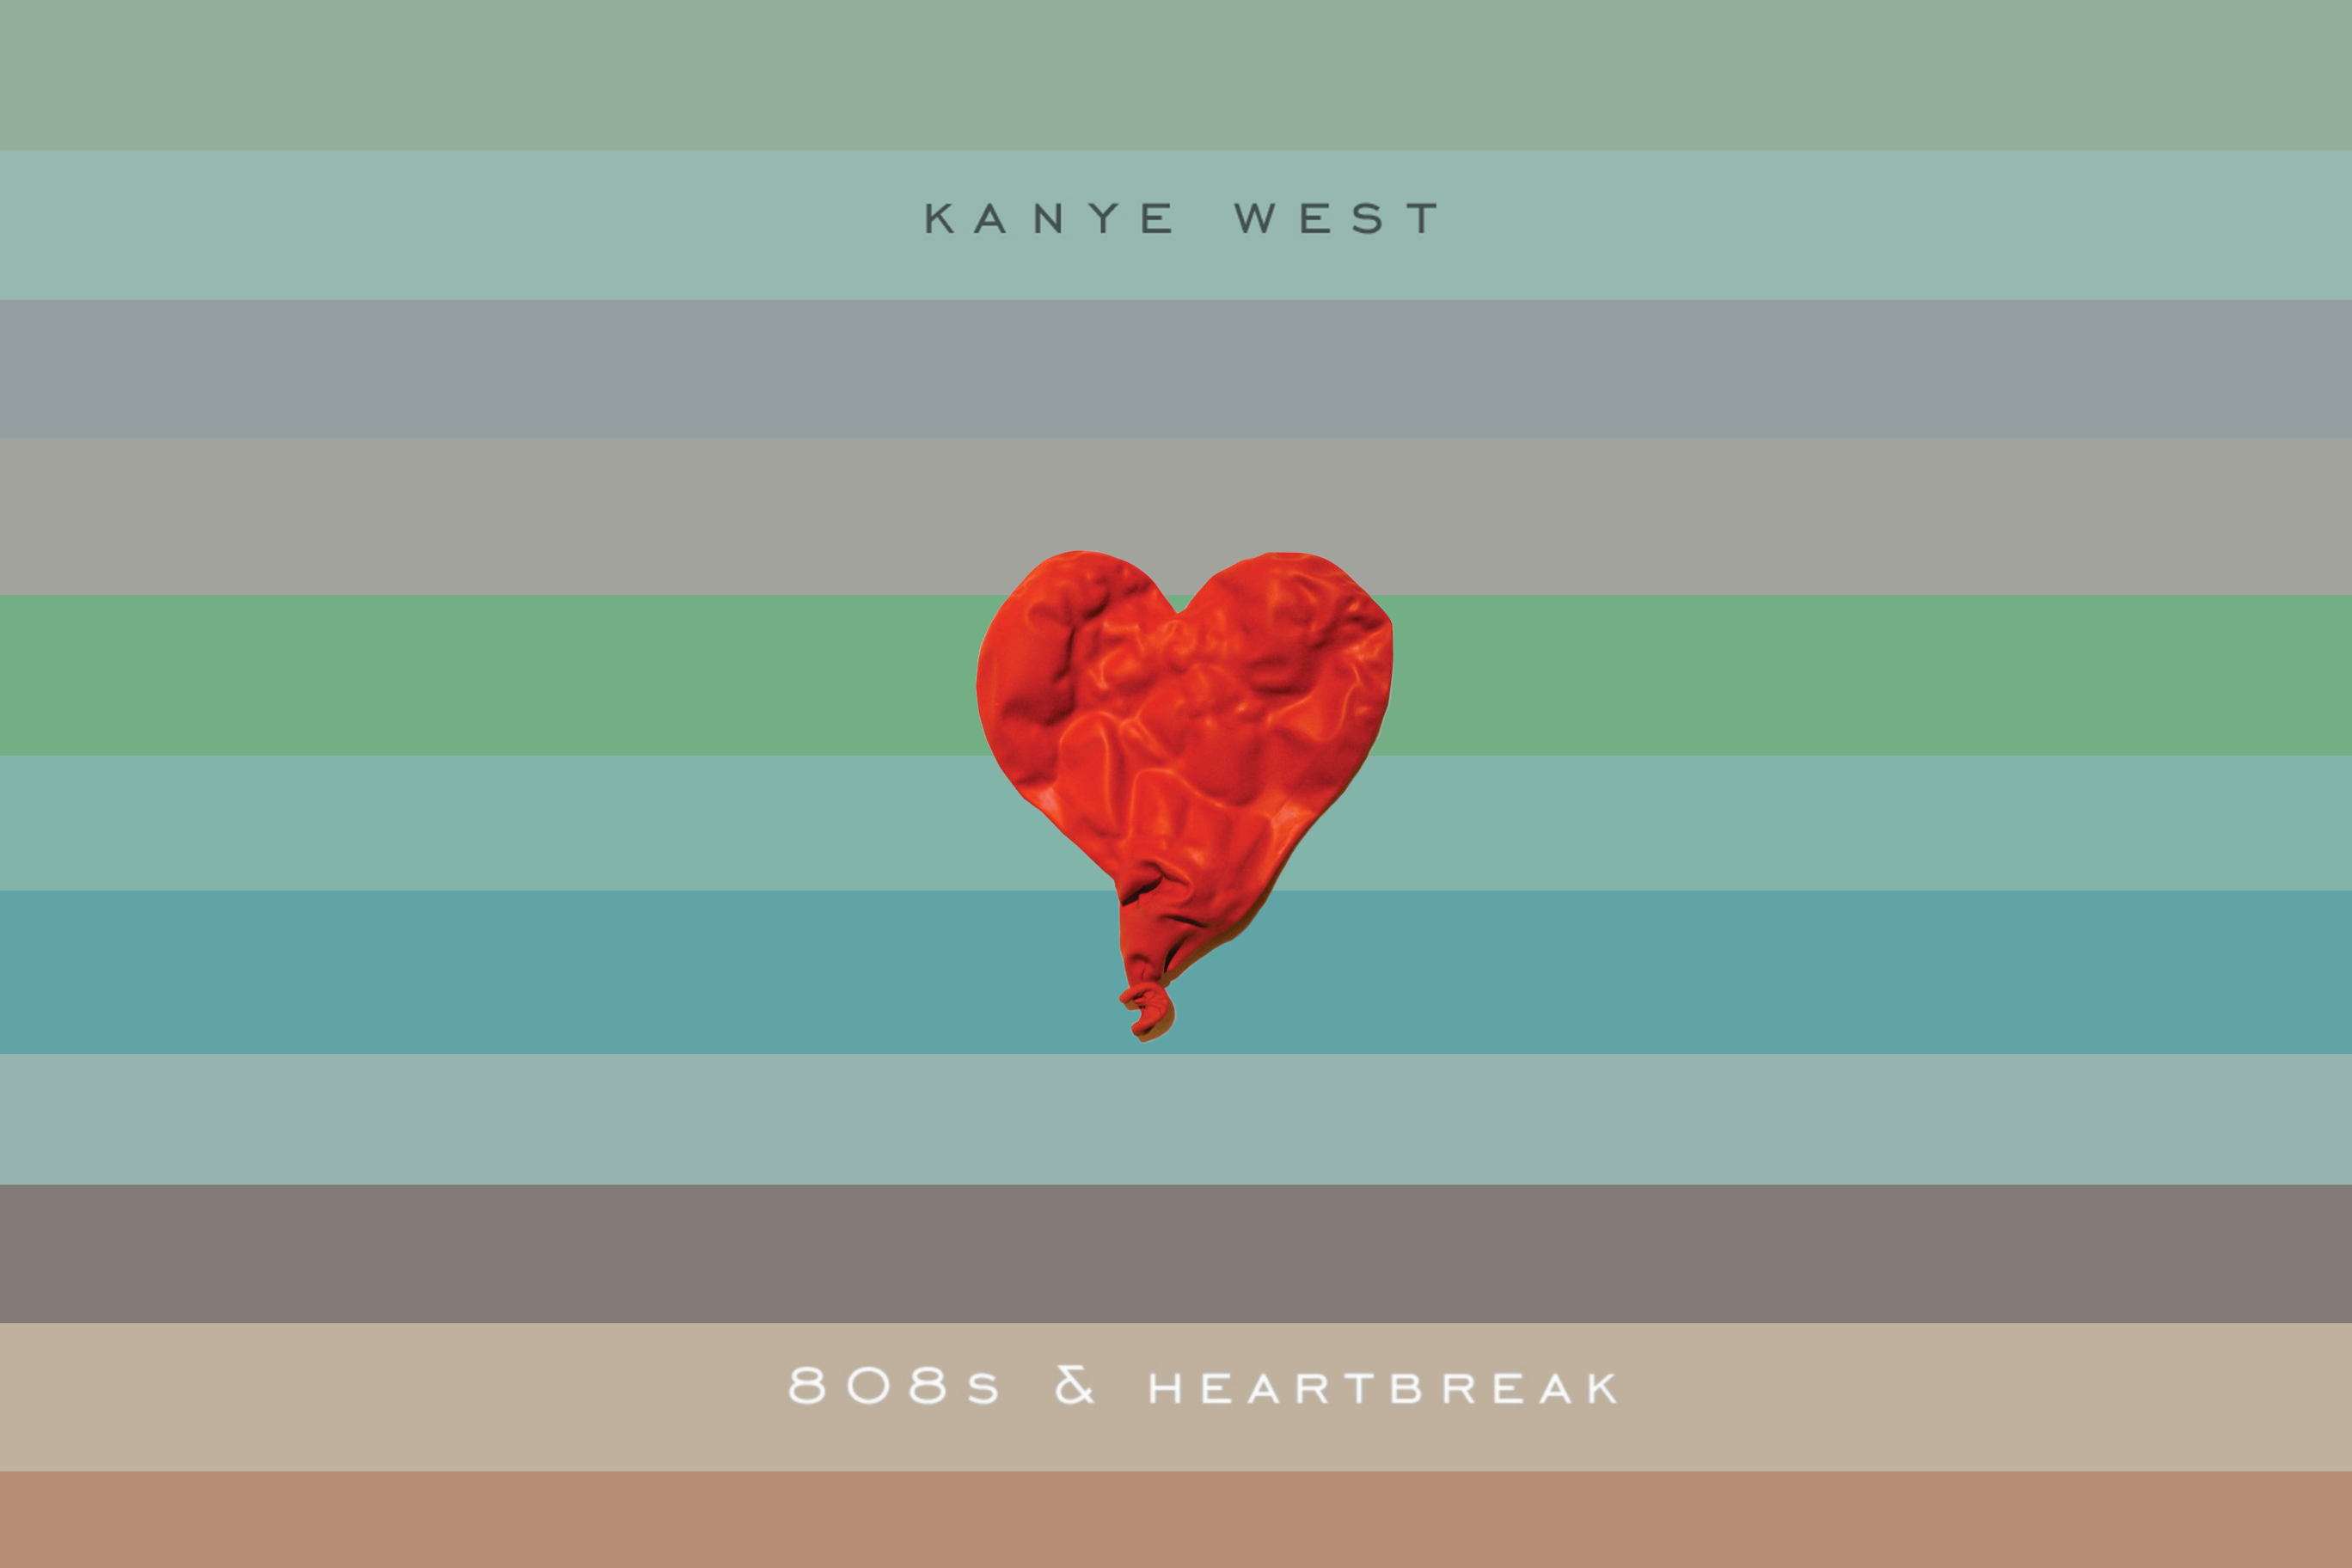 does 808s and heartbreak have swearing